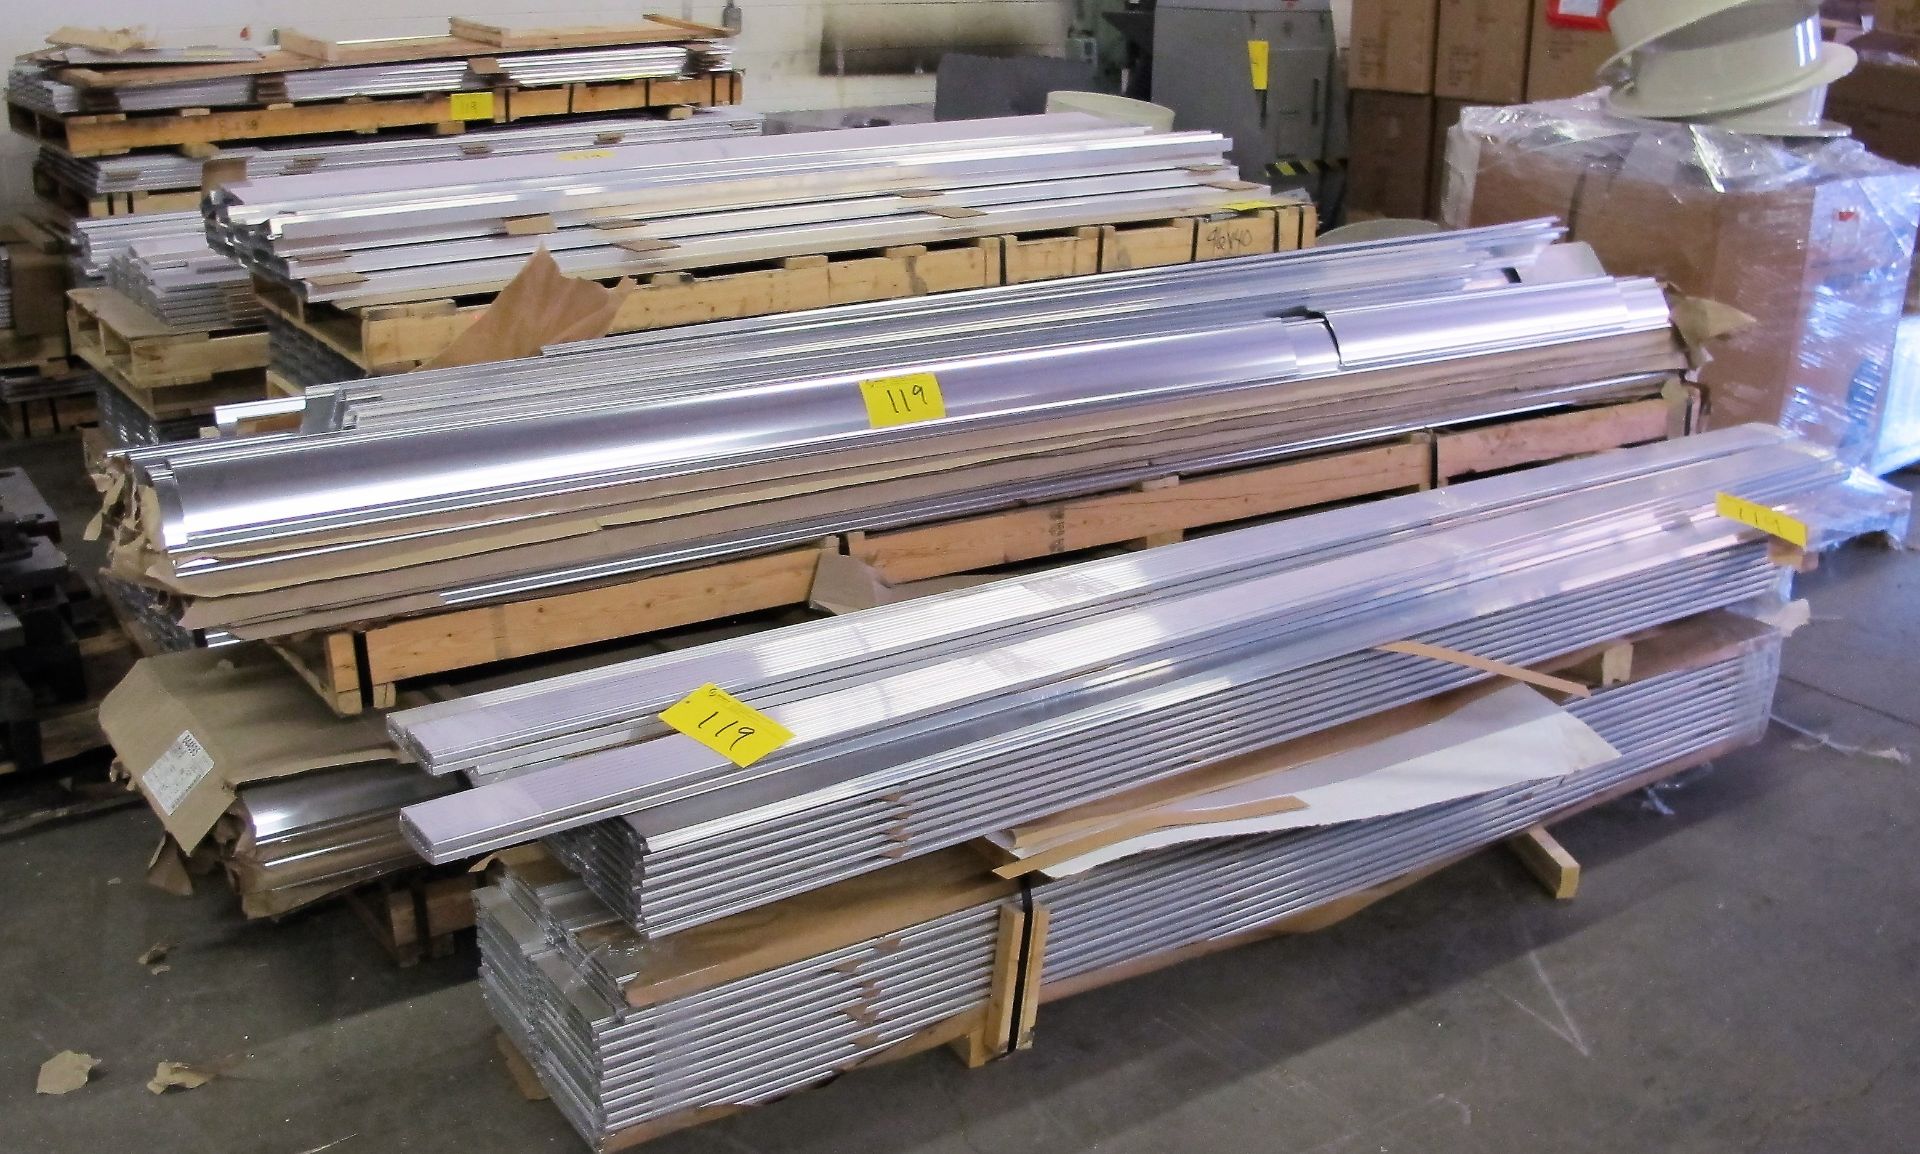 LARGE QTY OF ASST. ALUMINUM EXTRUSIONS, UP TO 8' LENGTH (APPROX. 12,500LBS)